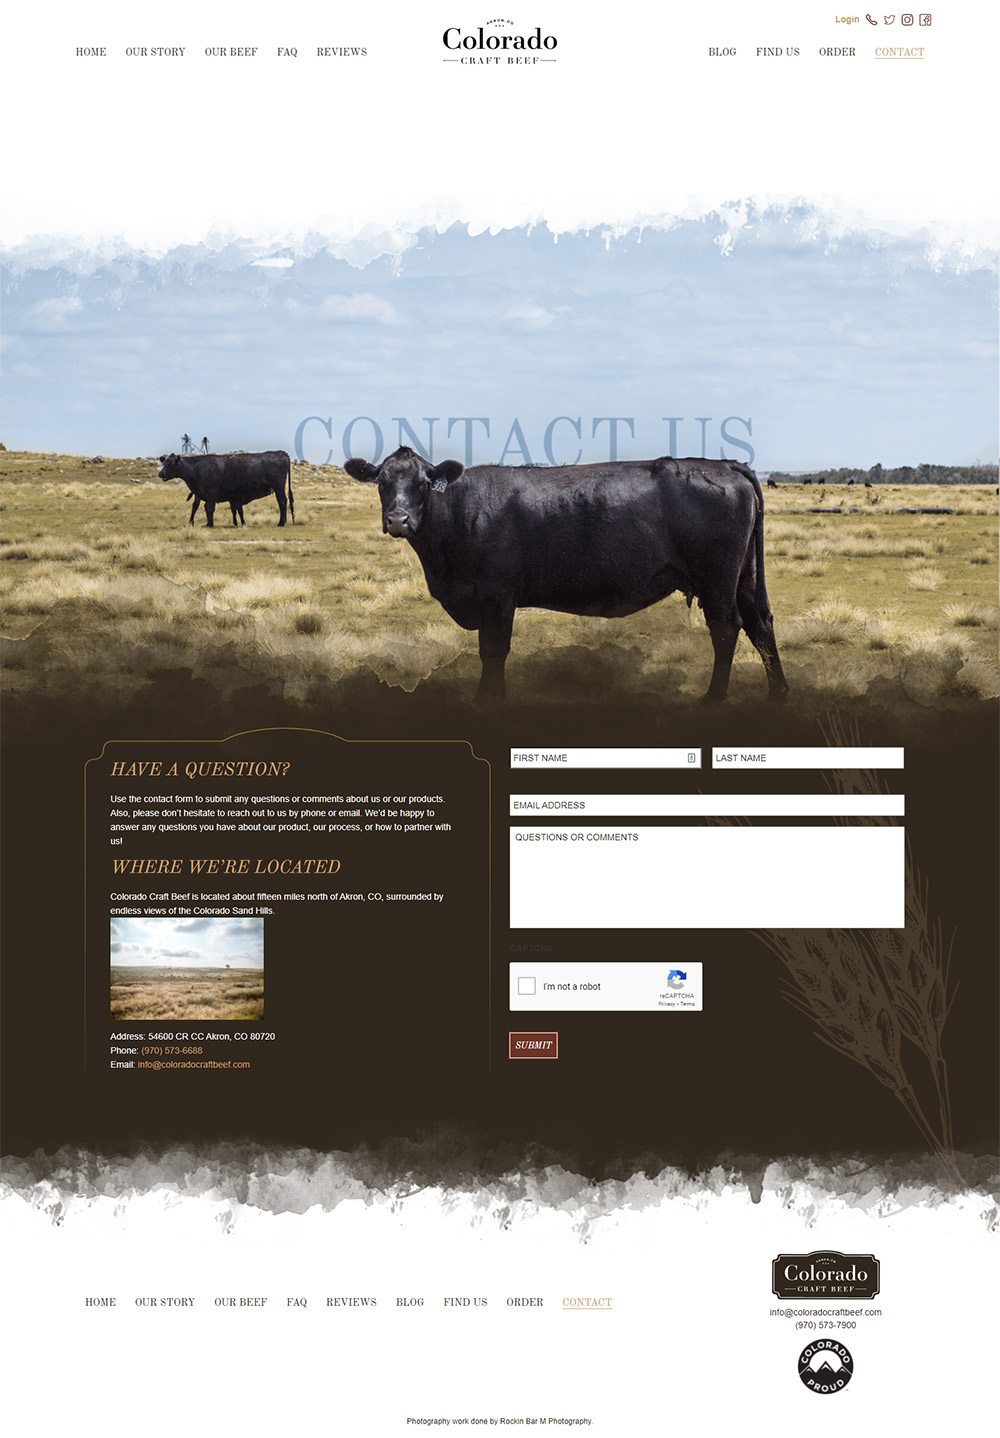 Colorado Craft Beef Contact Us page before redesign